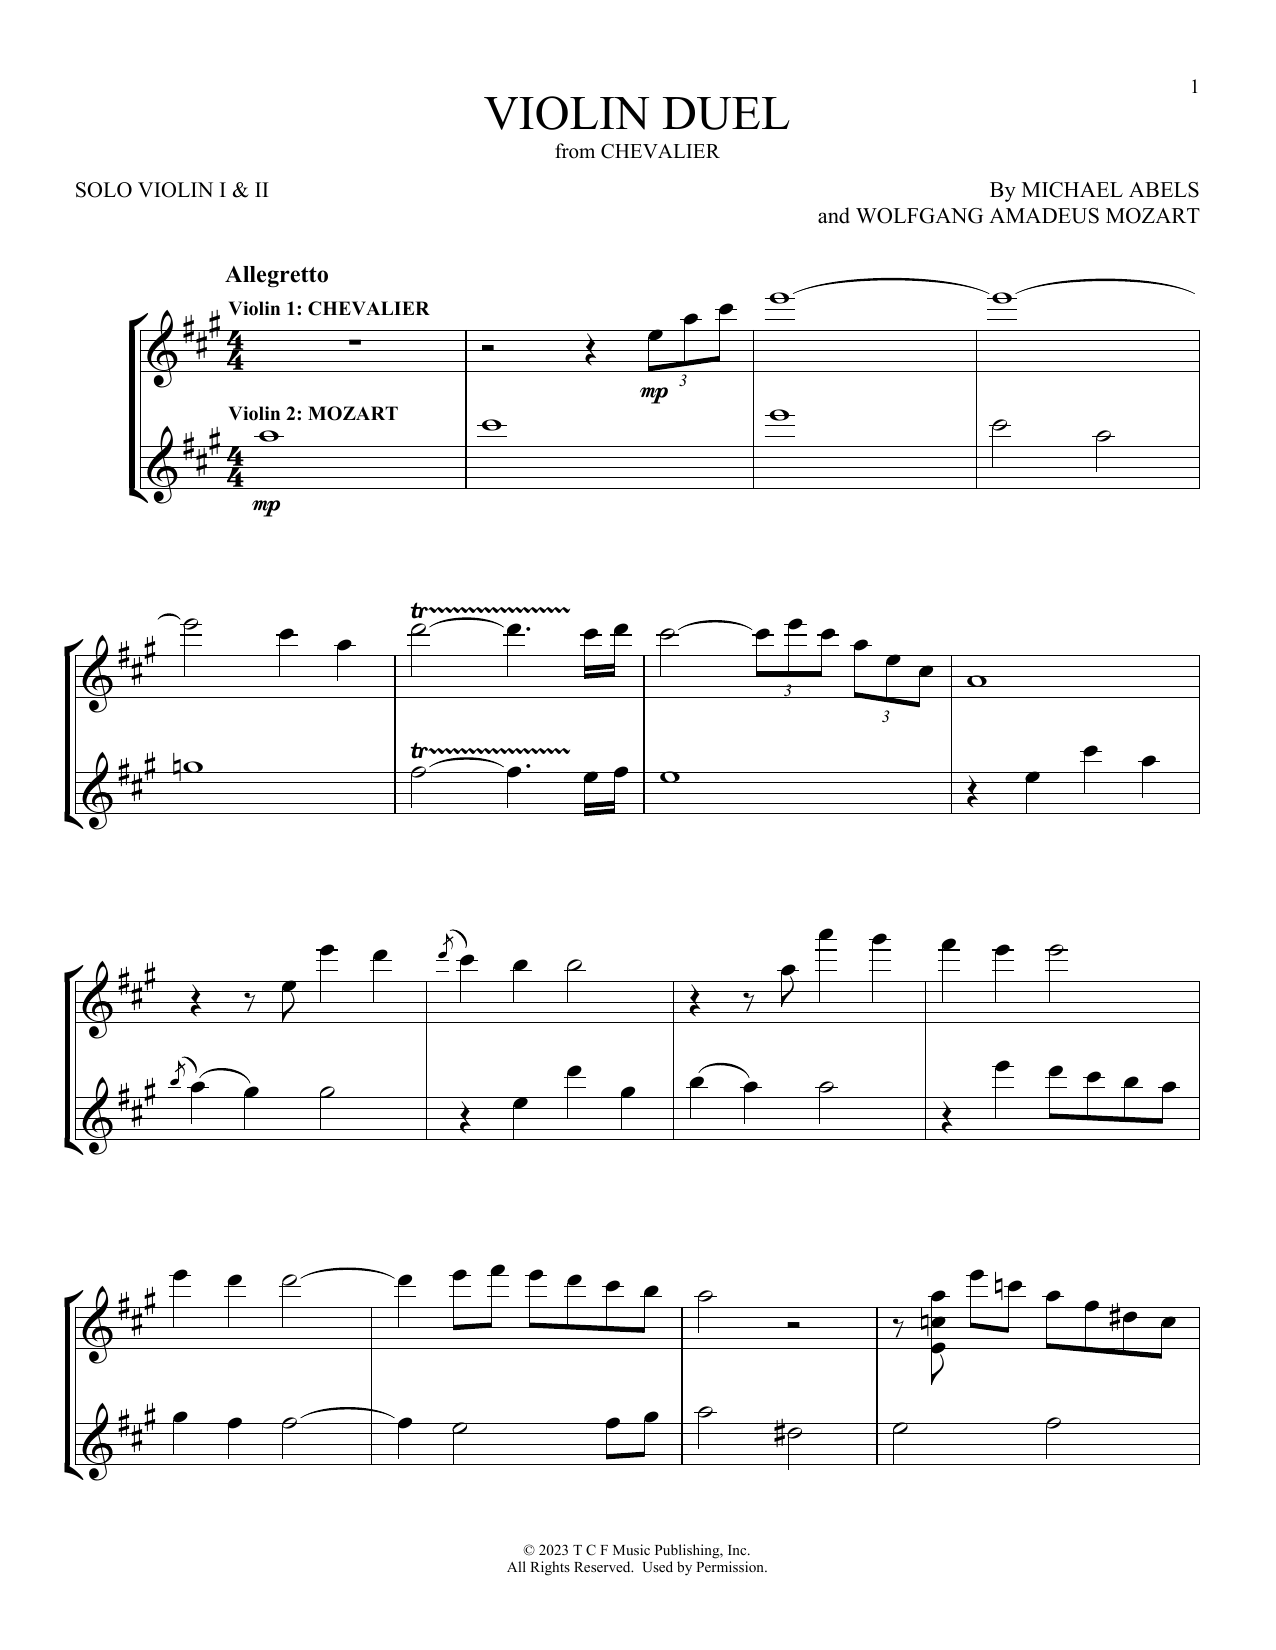 Download Michael Abels Violin Duel (from Chevalier) Sheet Music